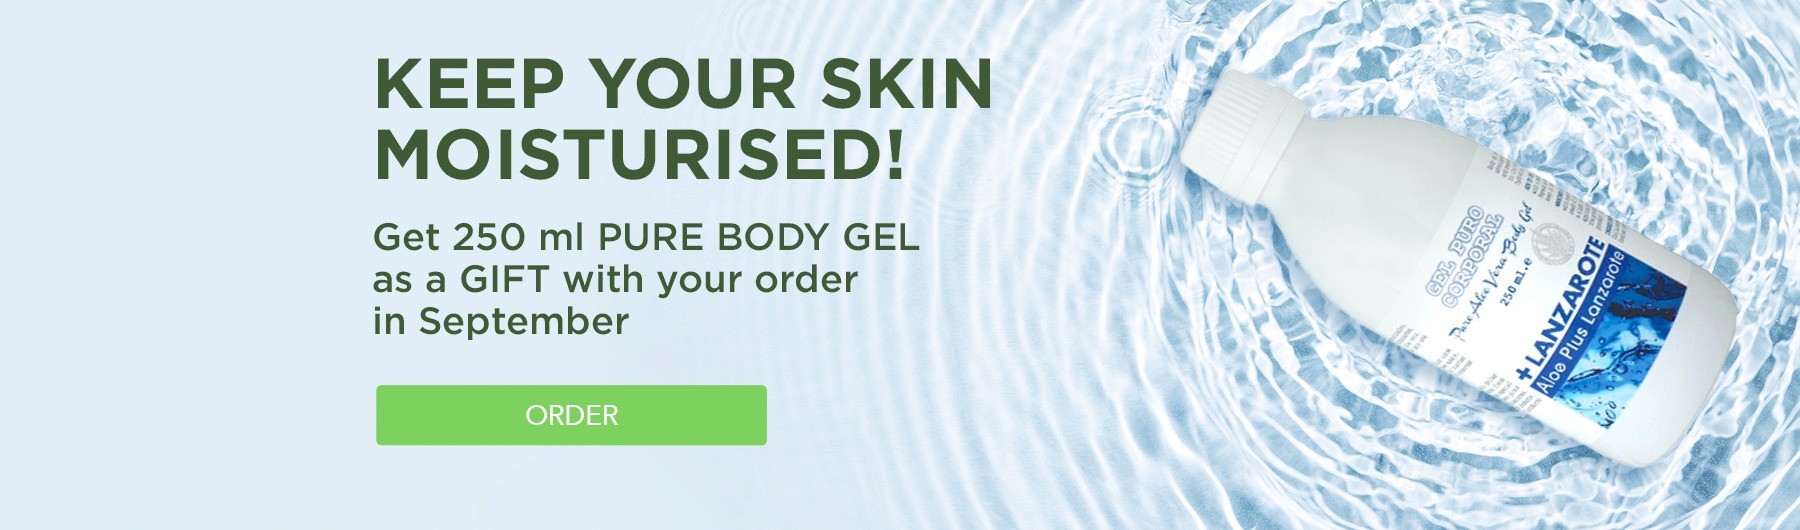 Get 250 ml PURE BODY GEL as a GIFT with your order in September